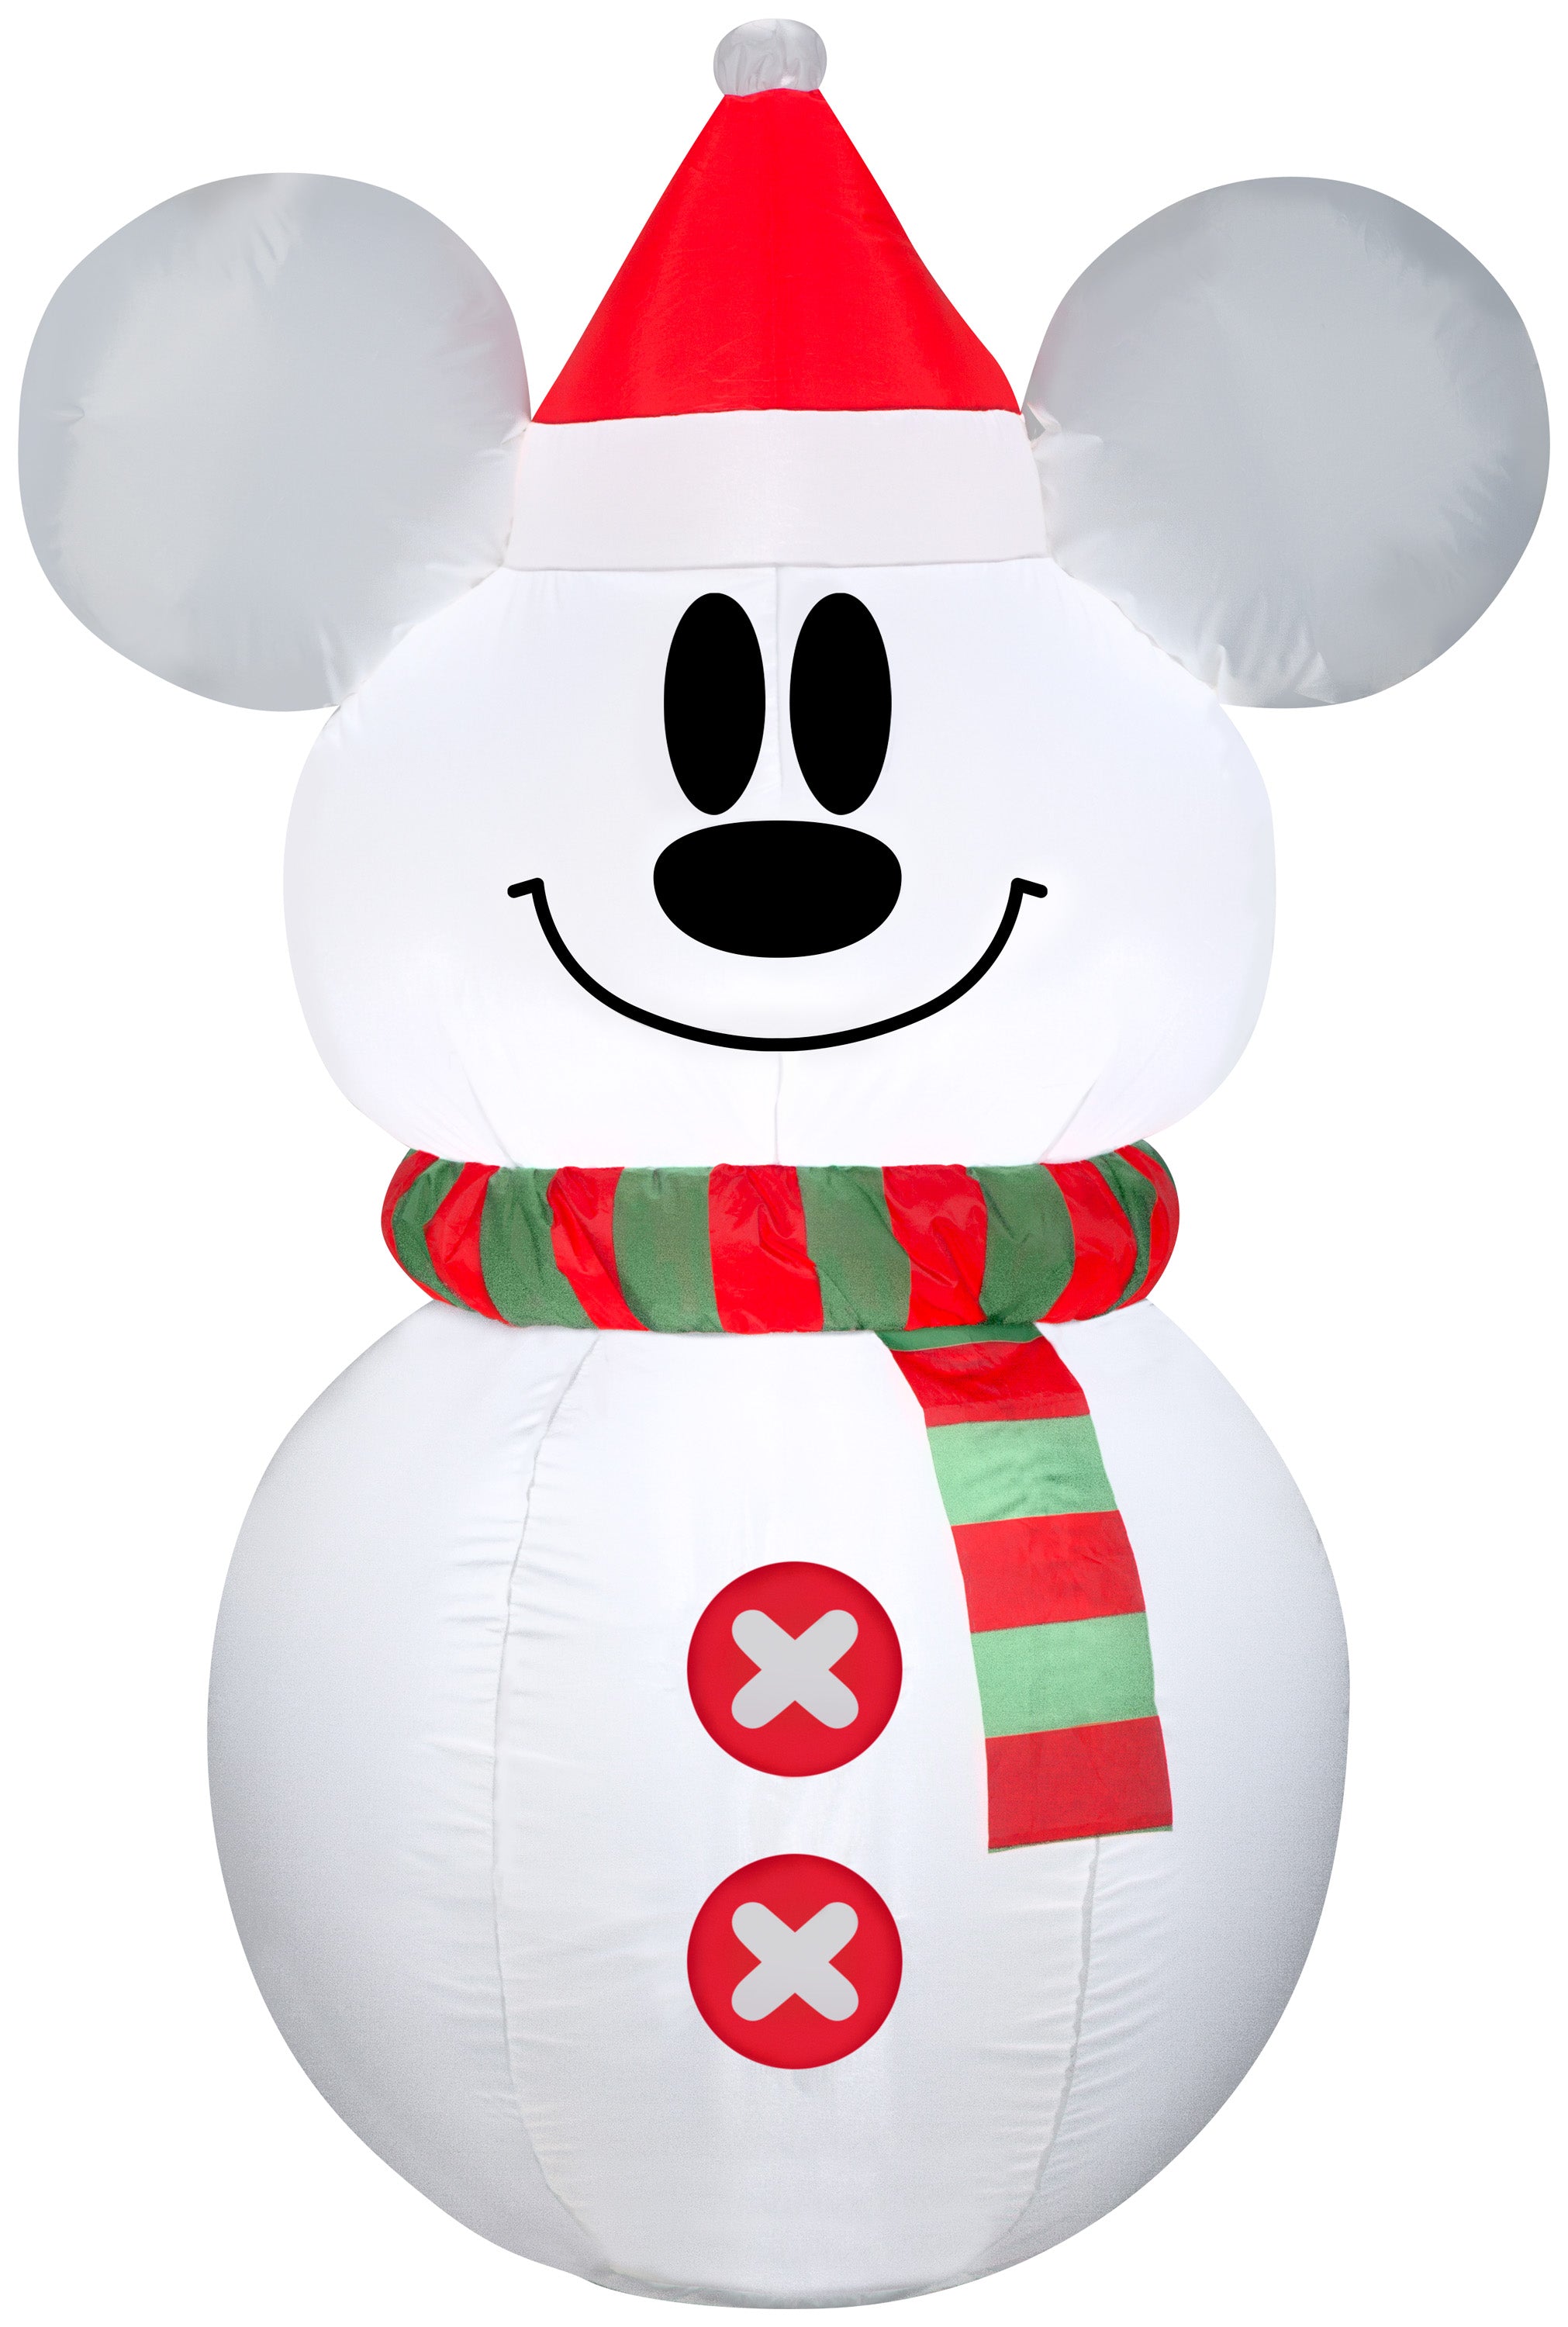 Gemmy Christmas Airblown Inflatable Mickey Mouse Snowman, 3.5 ft Tall, white